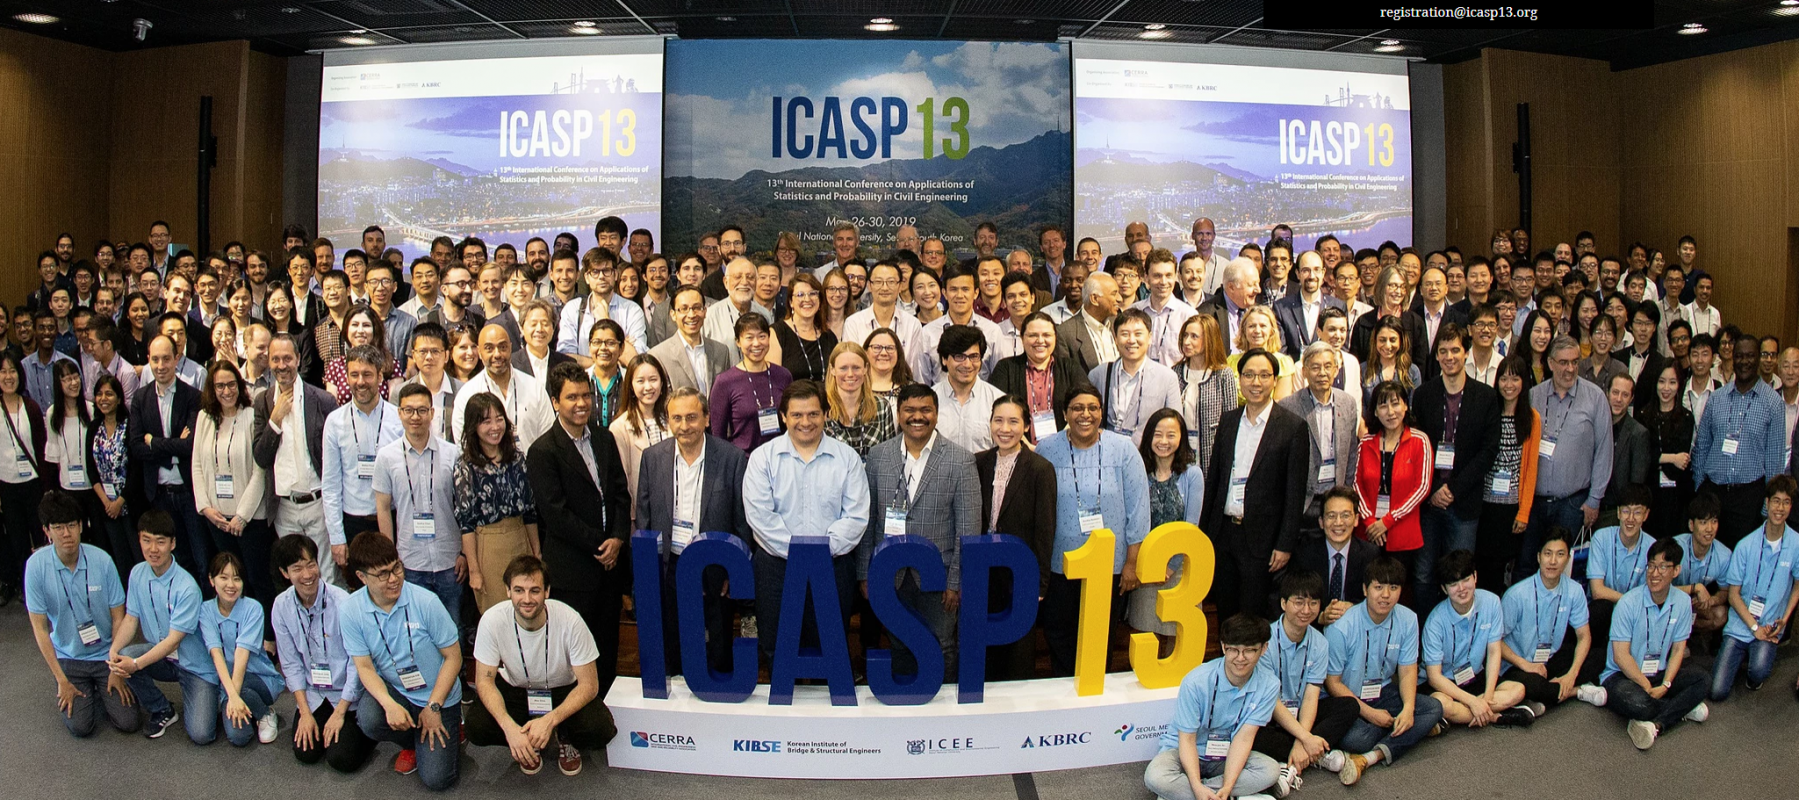 Liyang Ma used the Doctoral Travel Grant for International Connections to attend the ICASP13 conference in South Korea